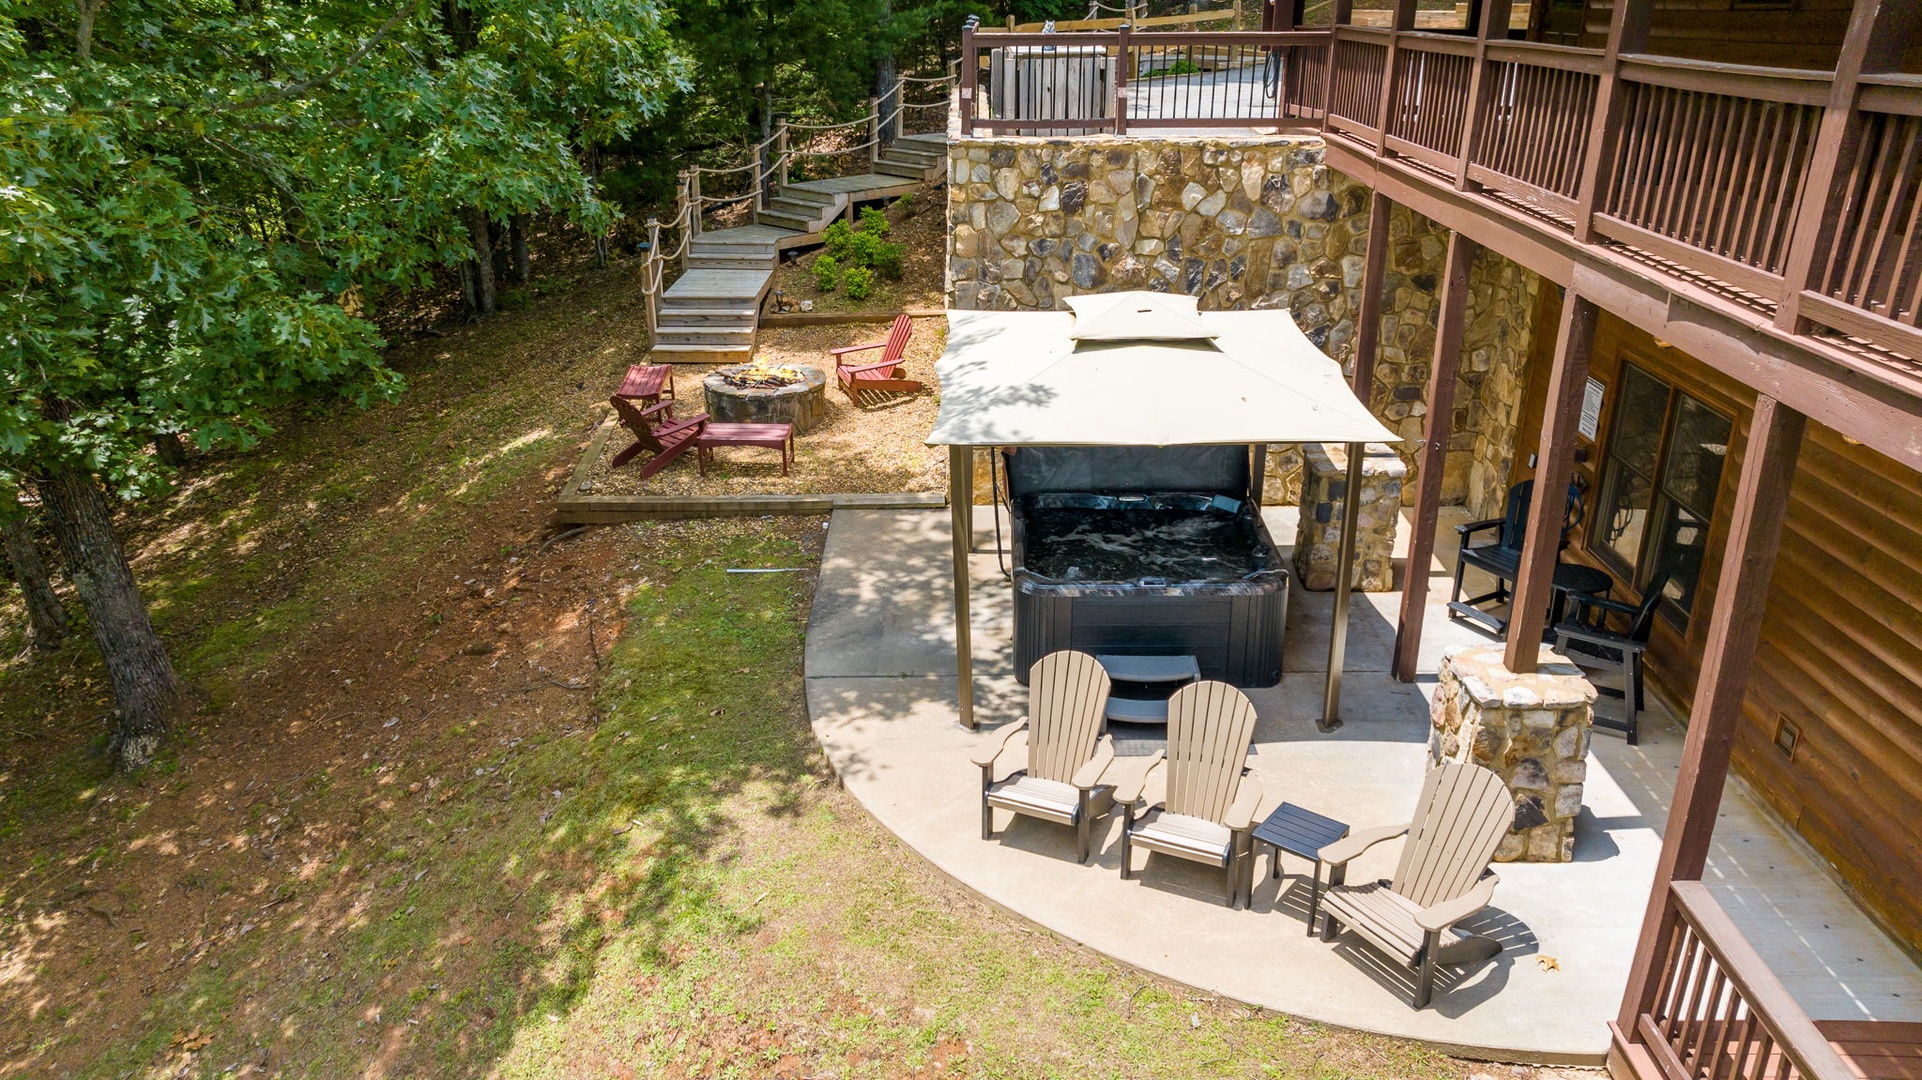 Moonlight Lodge - View of Fire Pit and Hot Tub Area